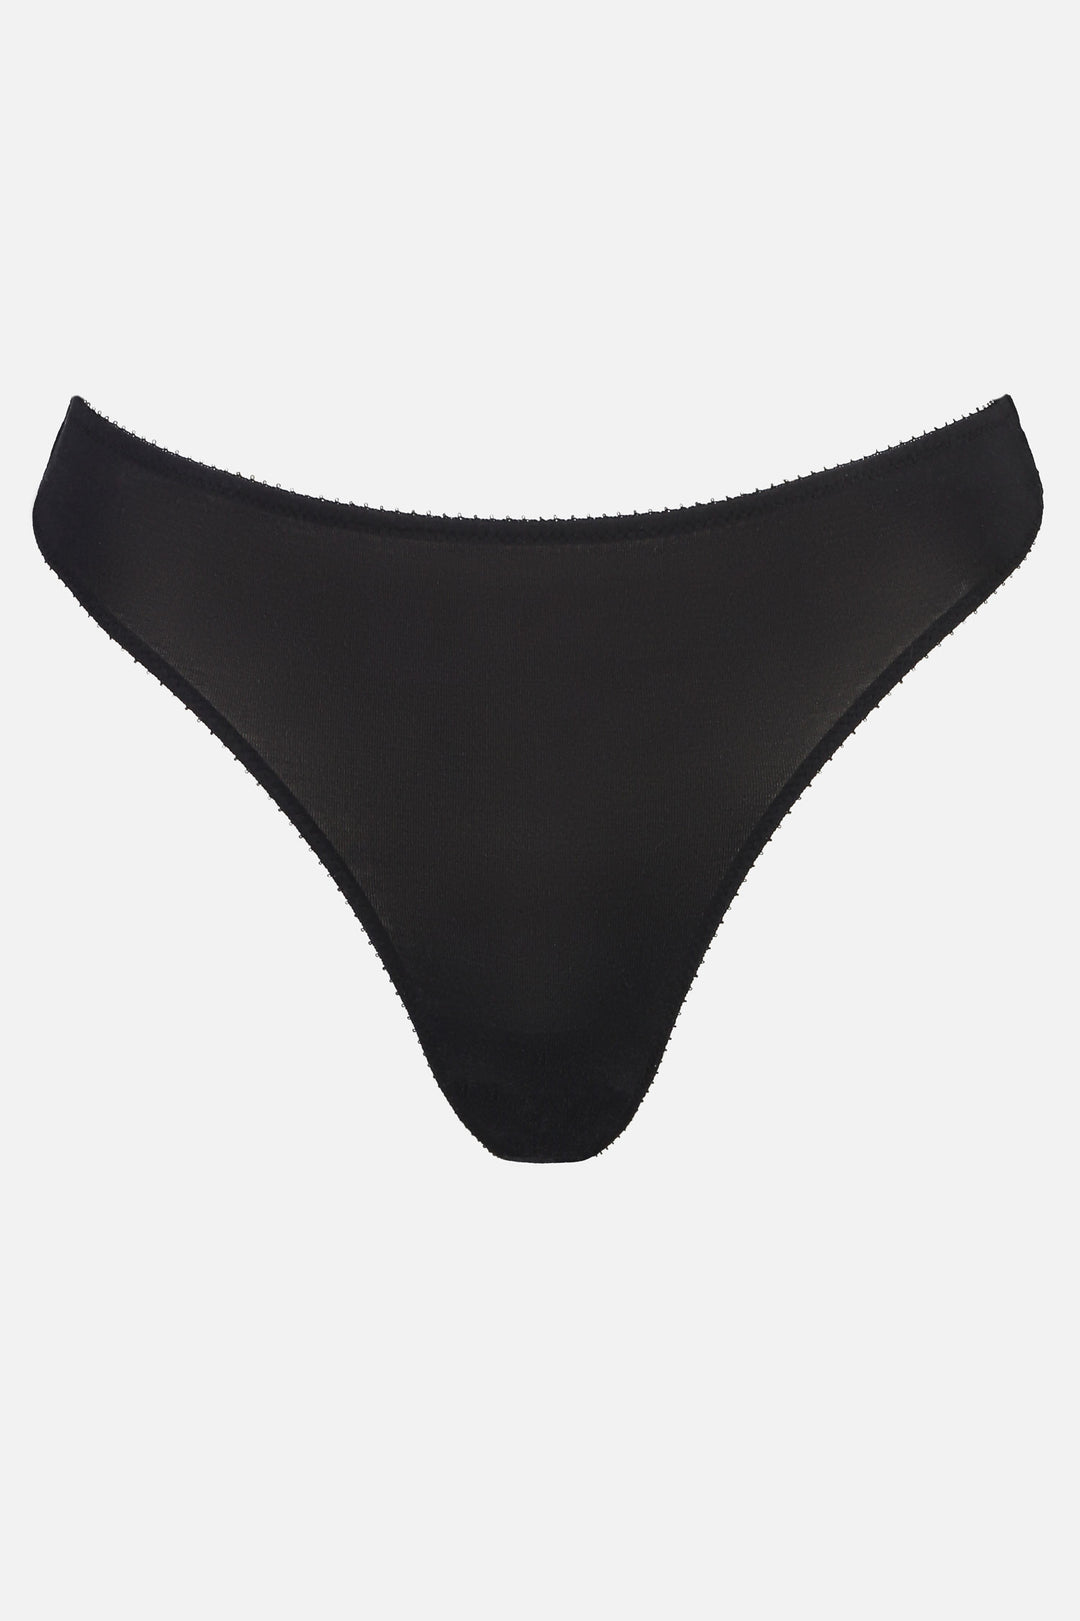 Videris Lingerie thong in black TENCEL™ a comfortable mid-rise style cut to follow the natural curve of your hips